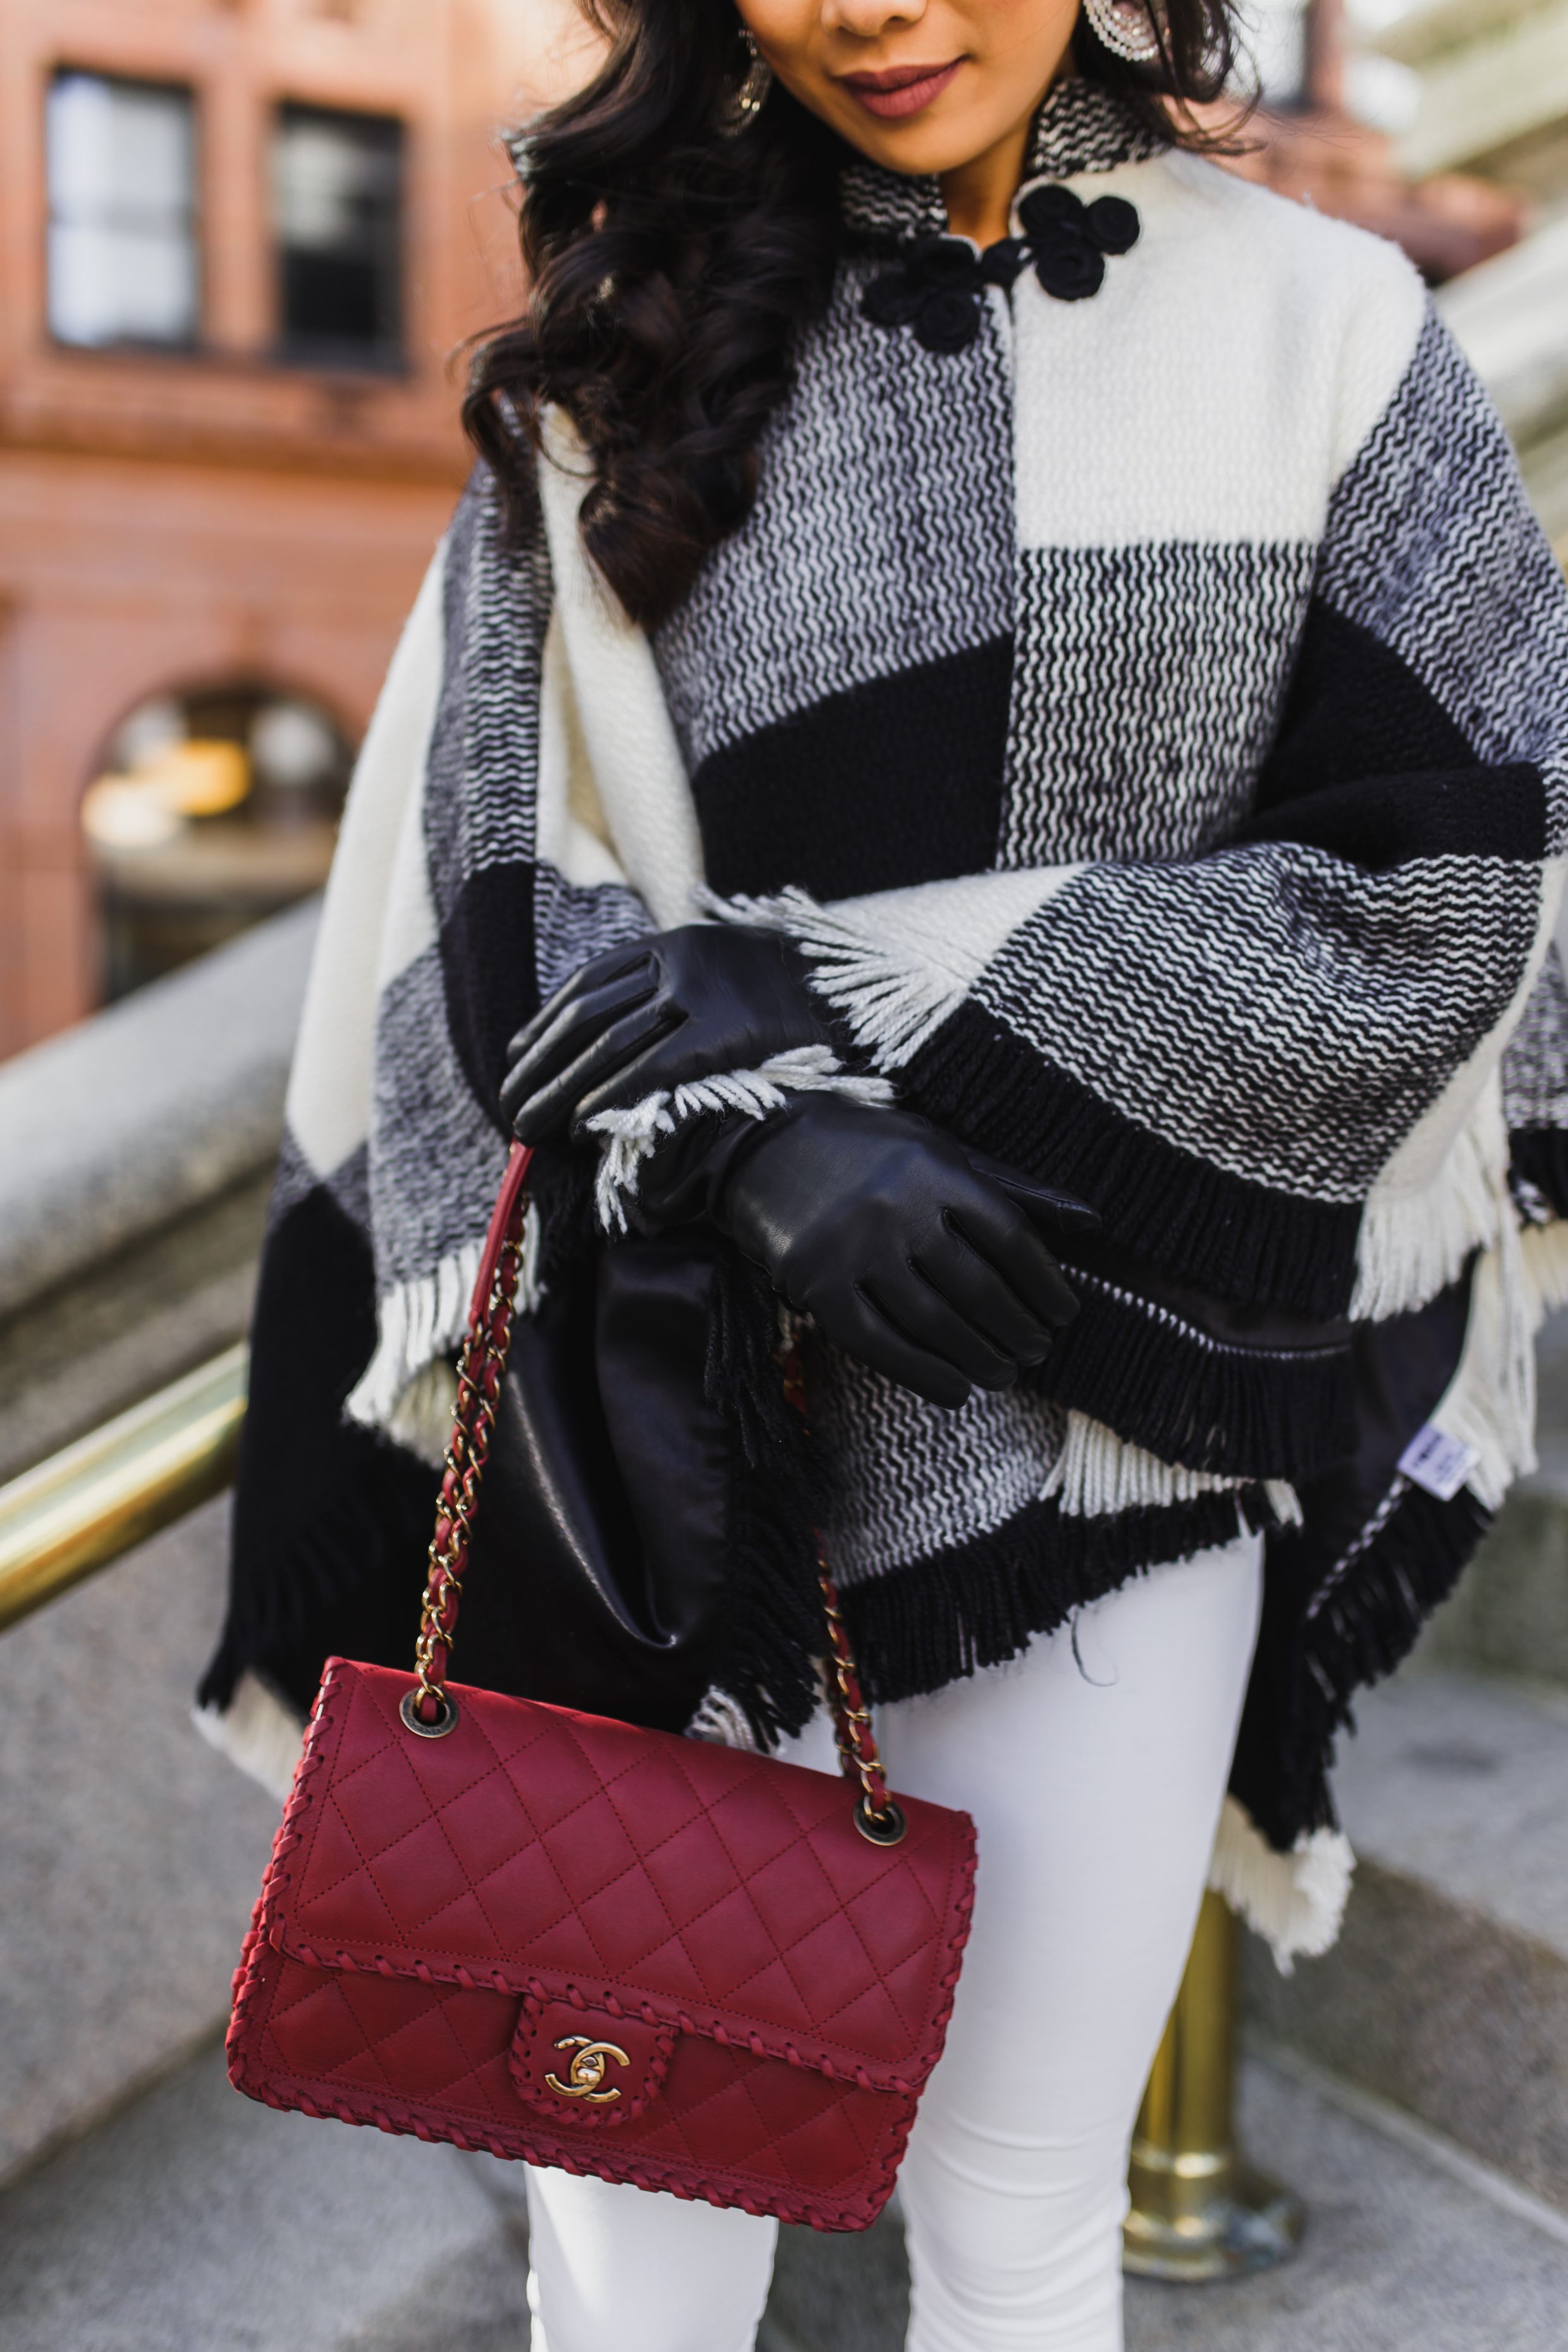 Black and white poncho with cashmere lined gloves and red Chanel flap bag